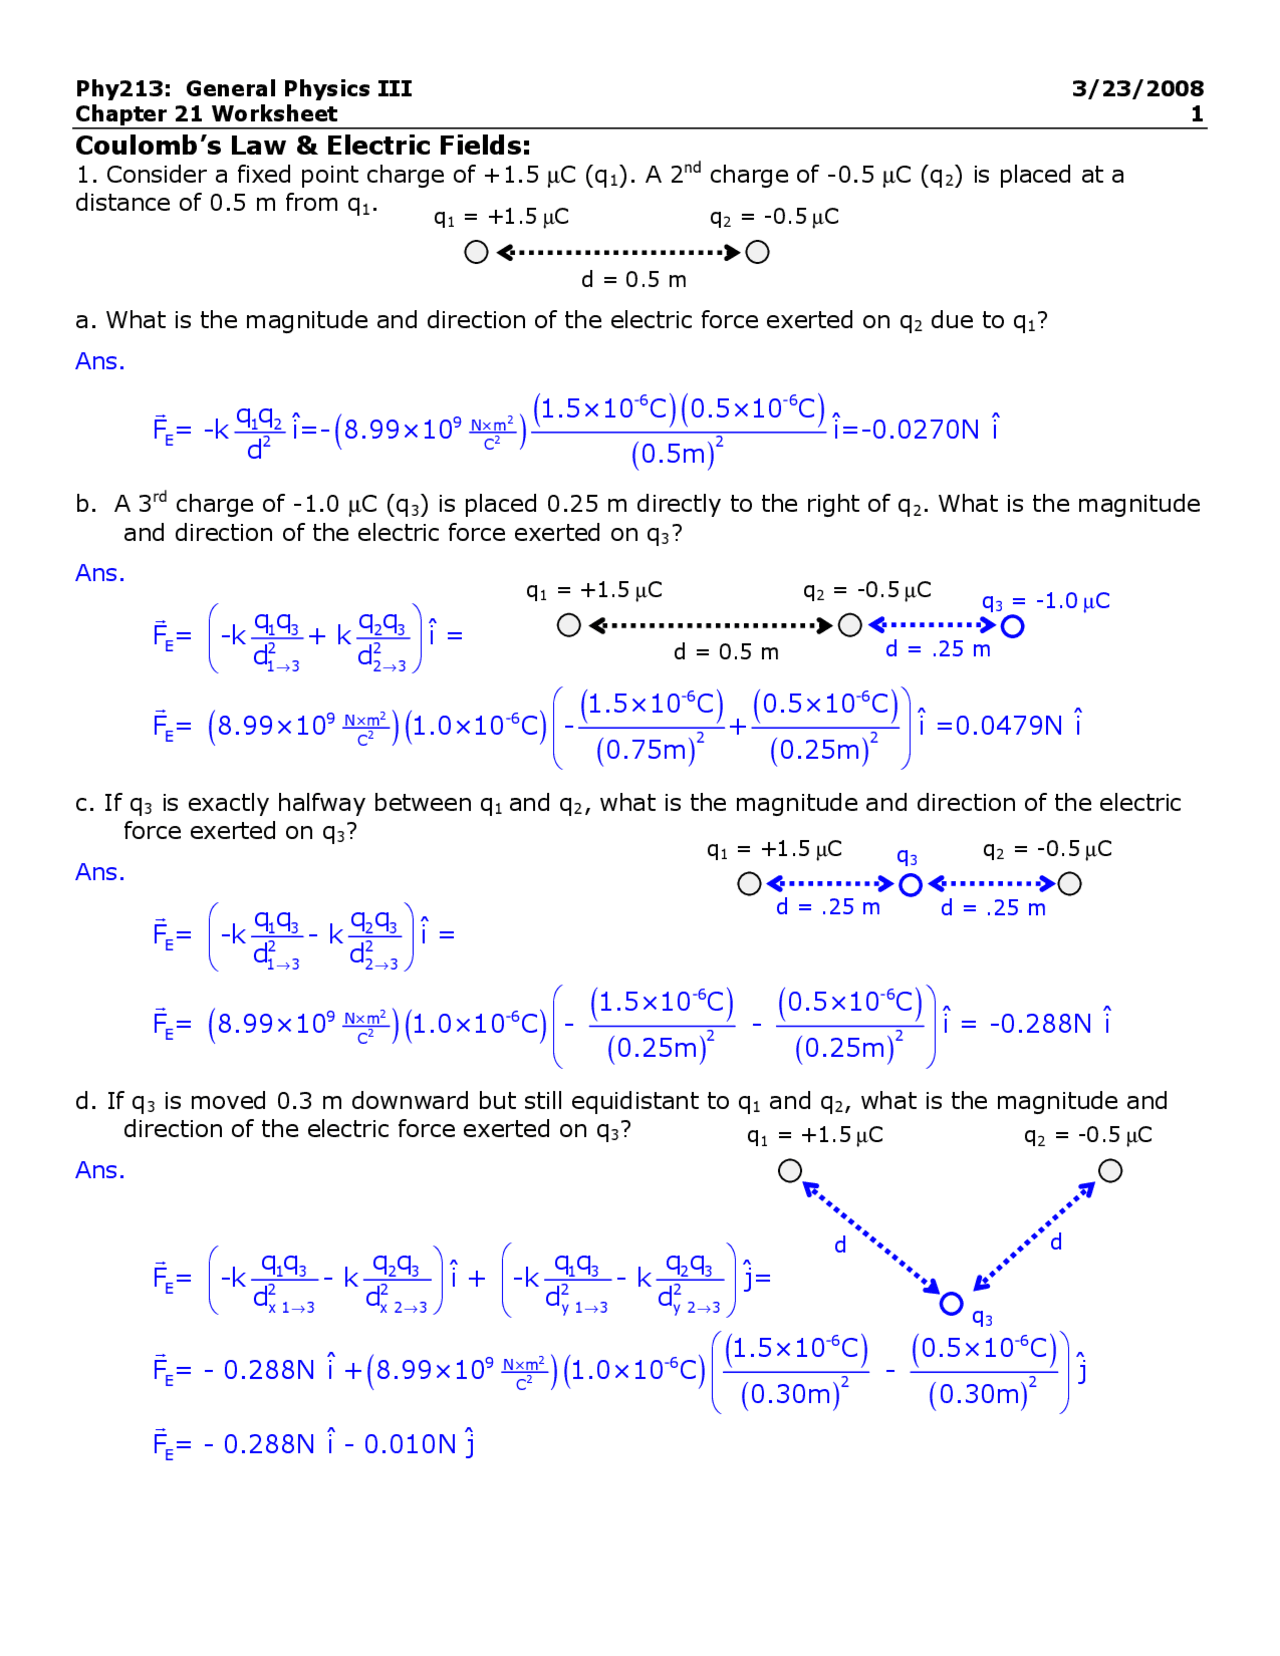 coulomb-s-law-and-electric-fields-worksheet-problems-with-answer-phy-213-assignments-physics